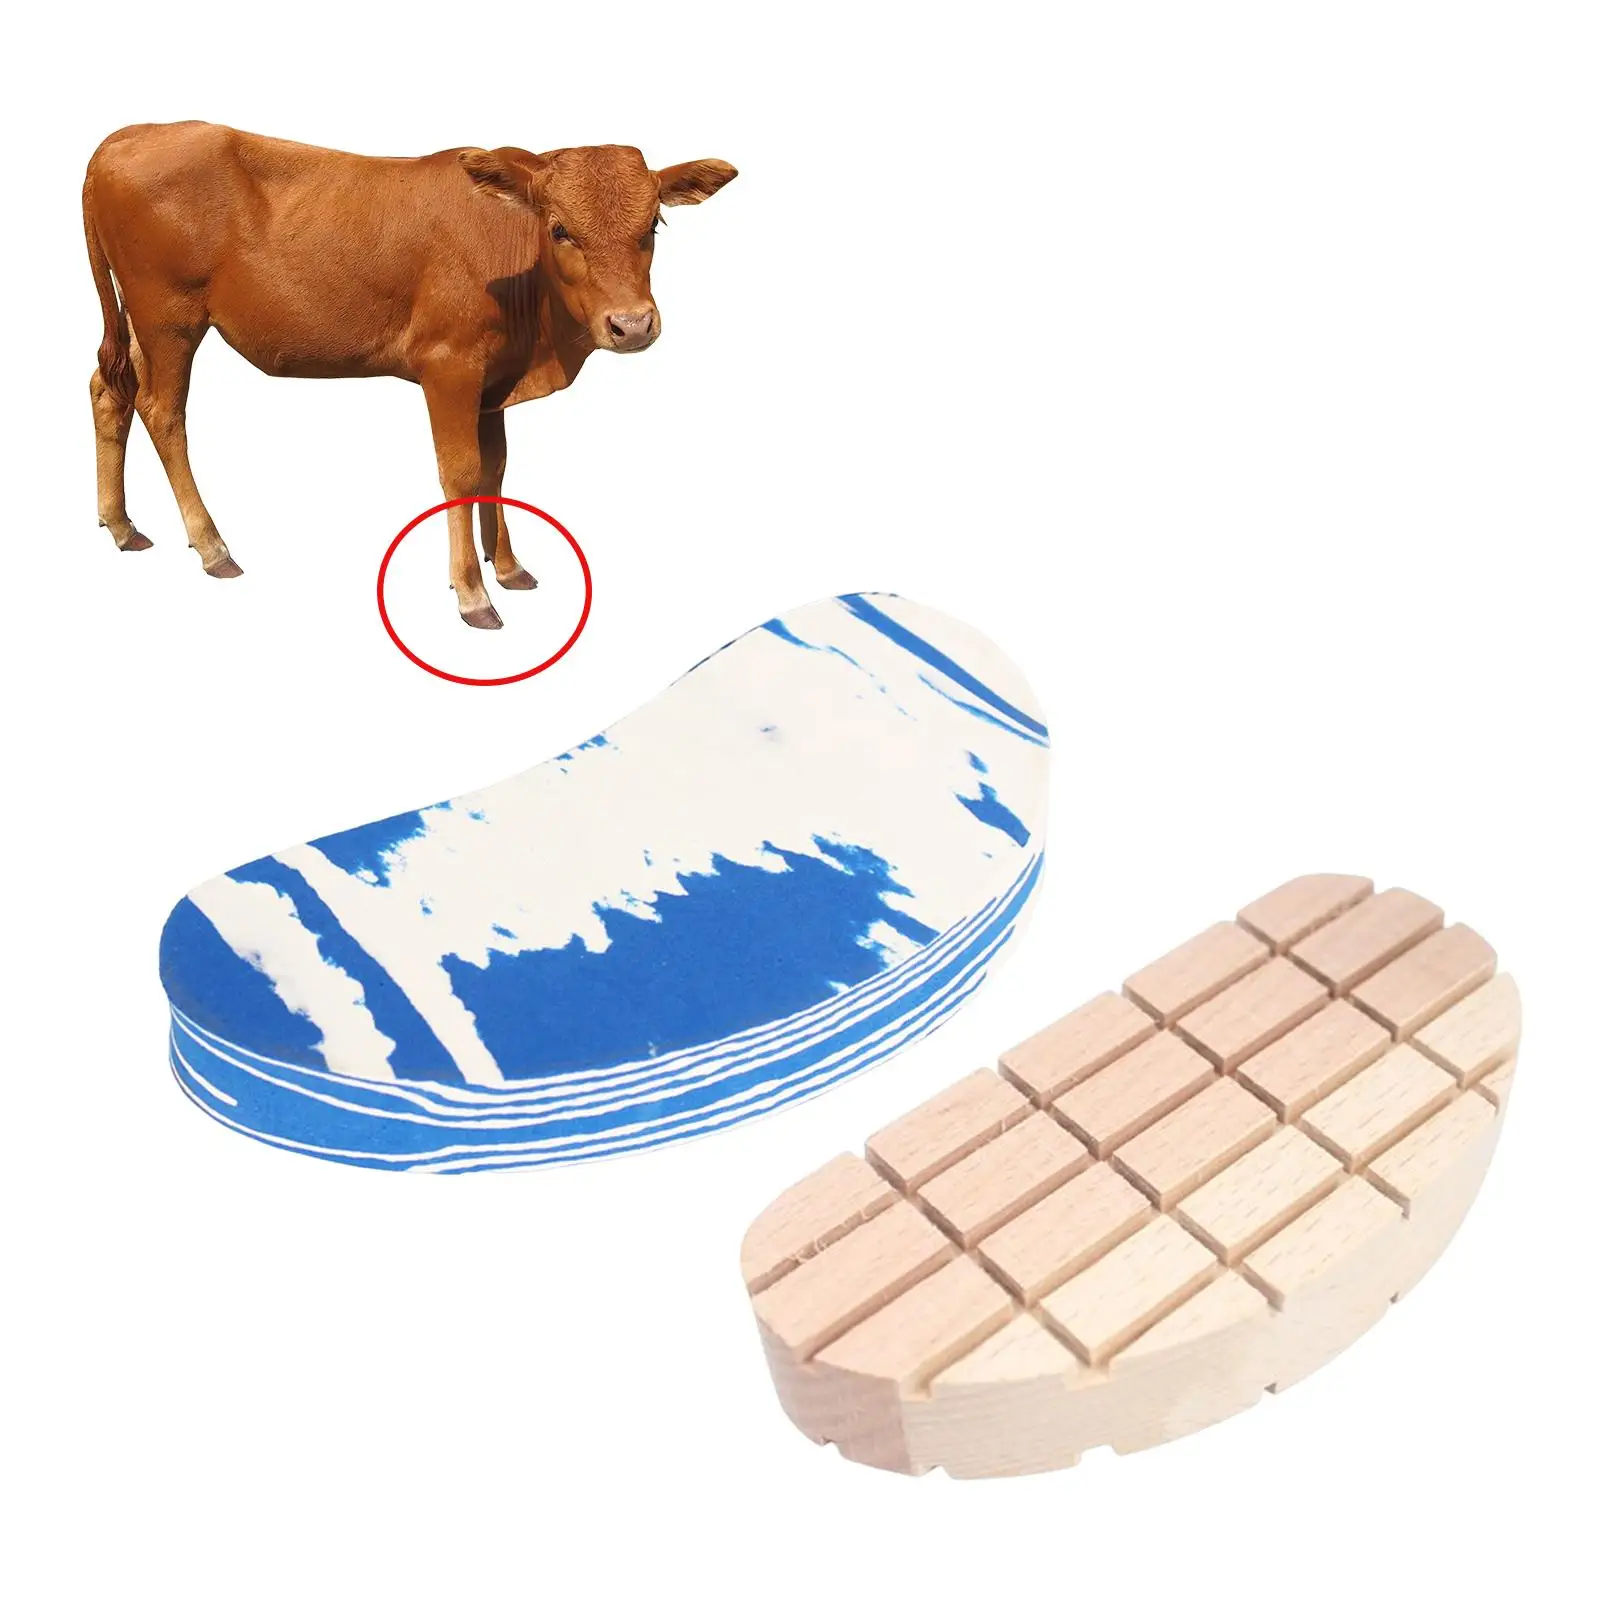 Cow Trimming Cushion Wearproof Riding Repair Tool for Cattles Pasture Horses